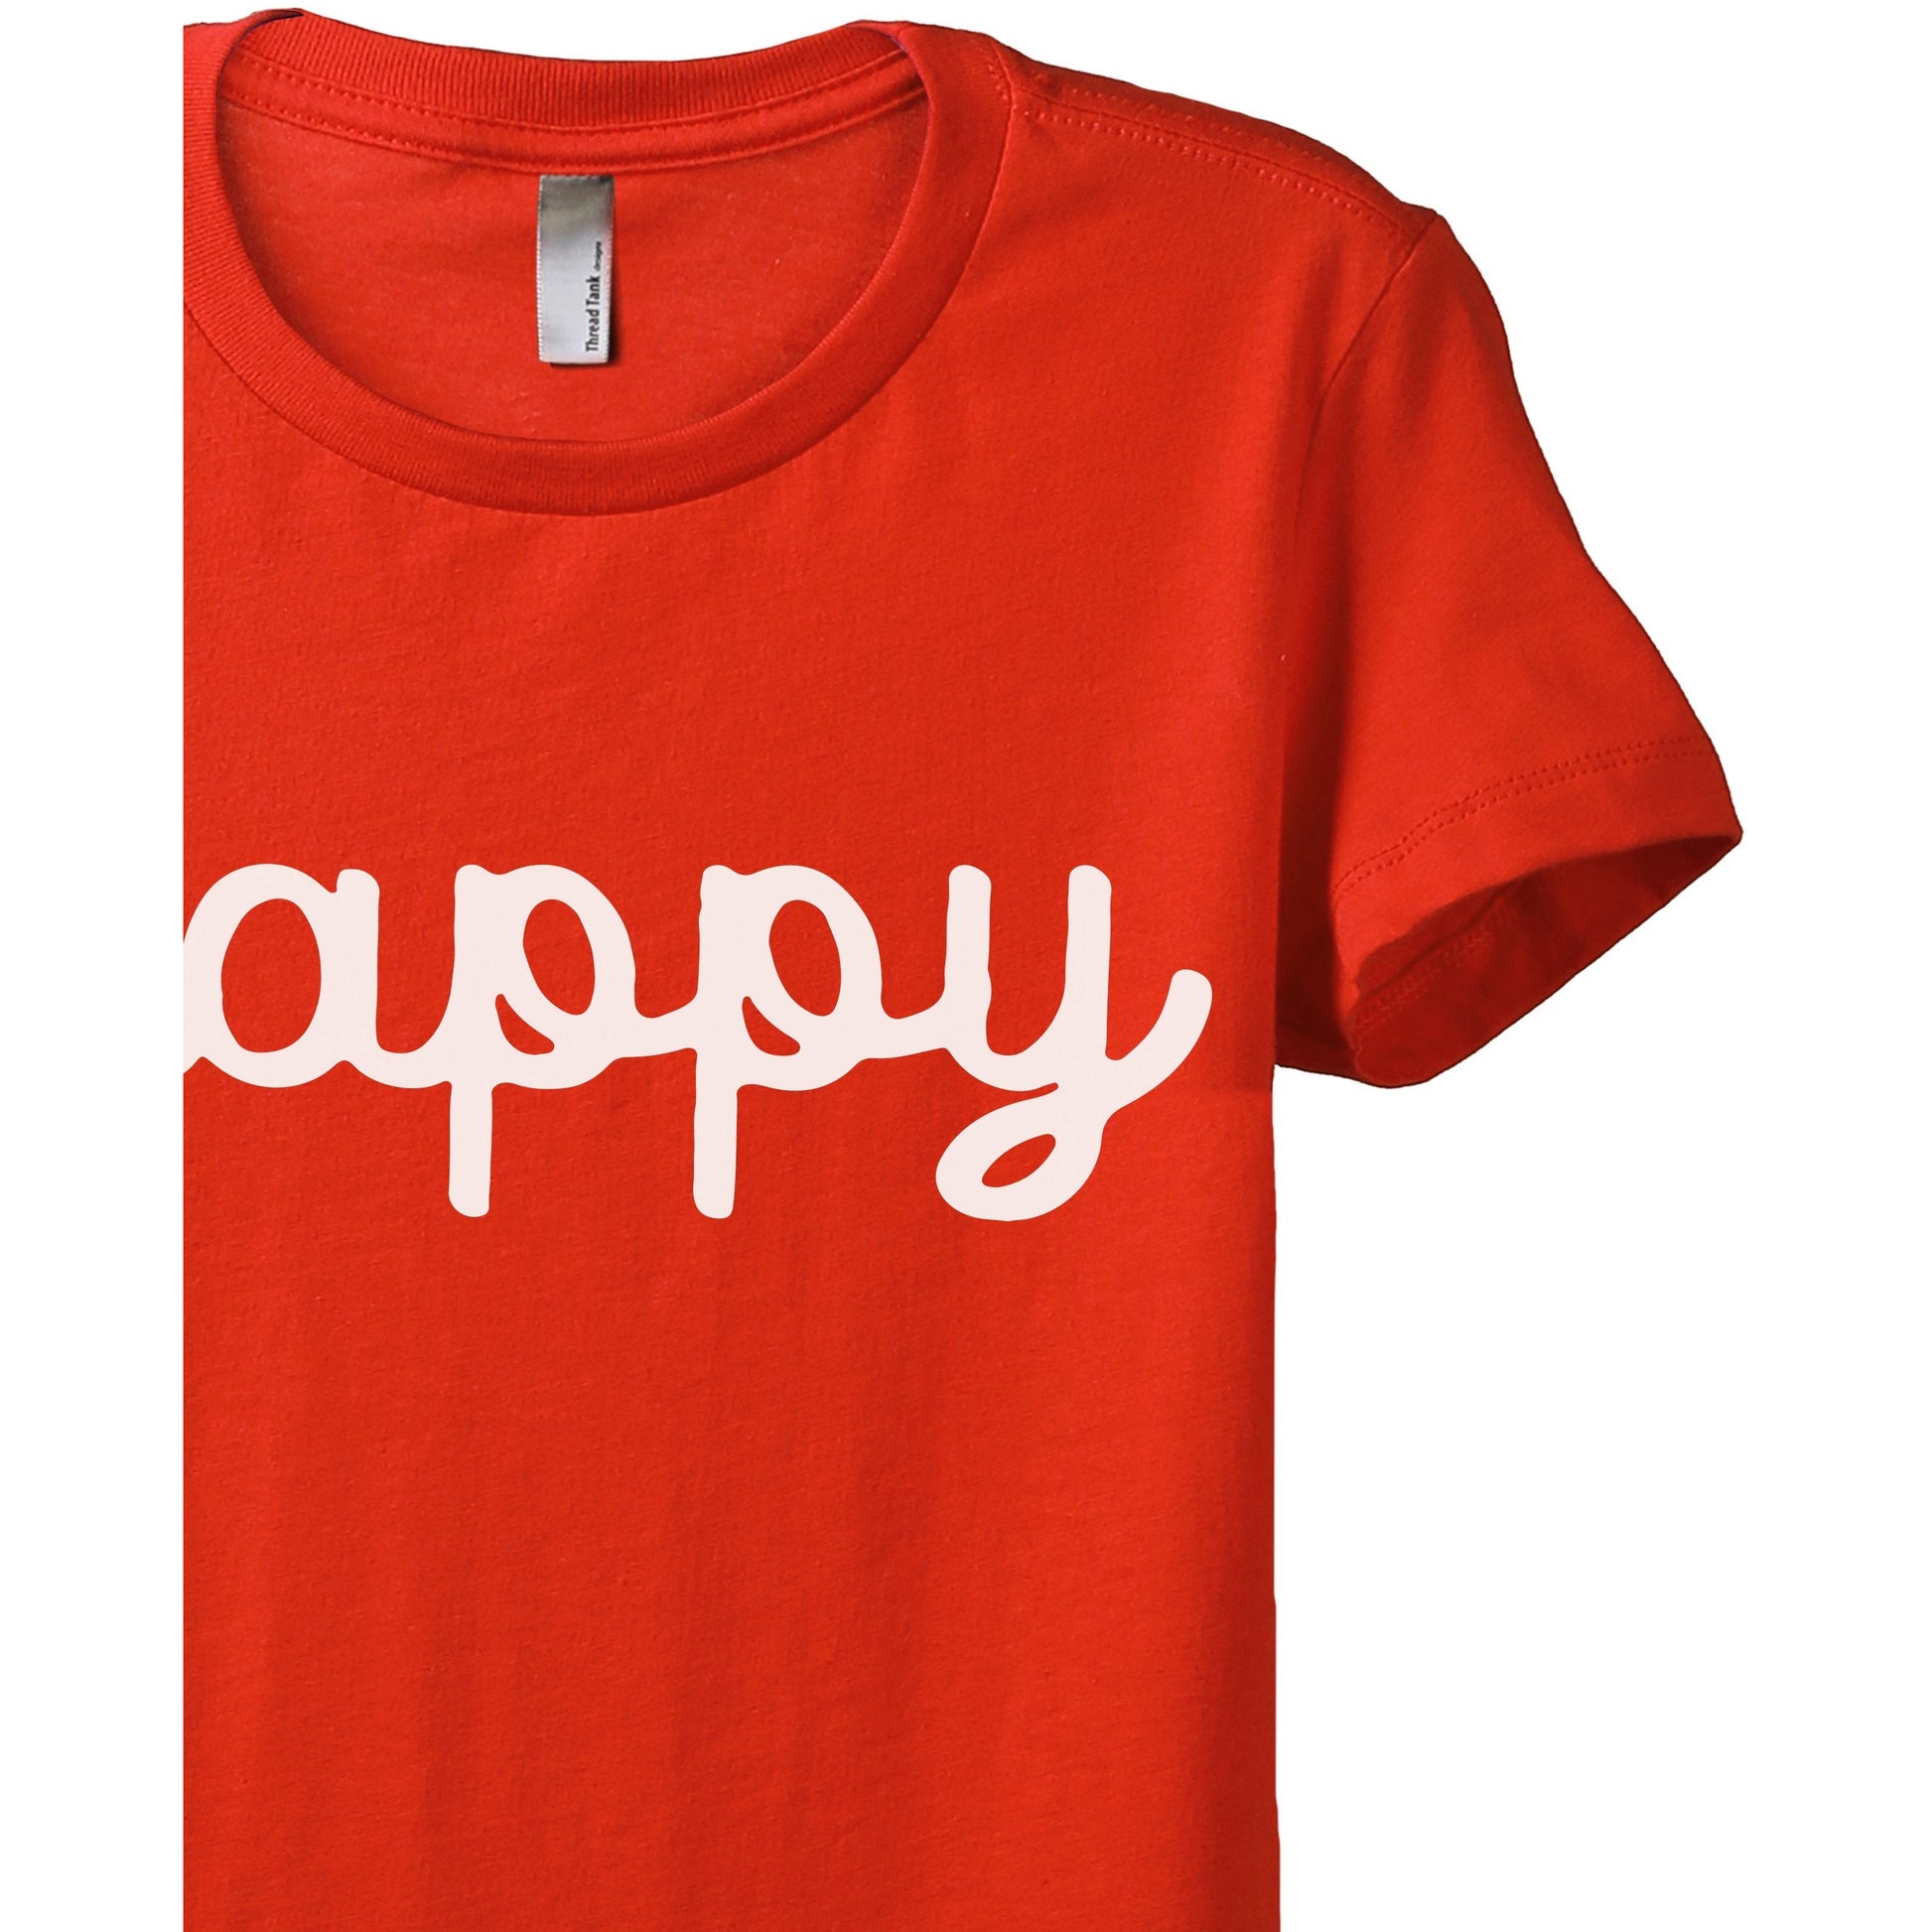 Happy Cursive Women's Relaxed Crewneck T-Shirt Top Tee Poppy Zoom Details